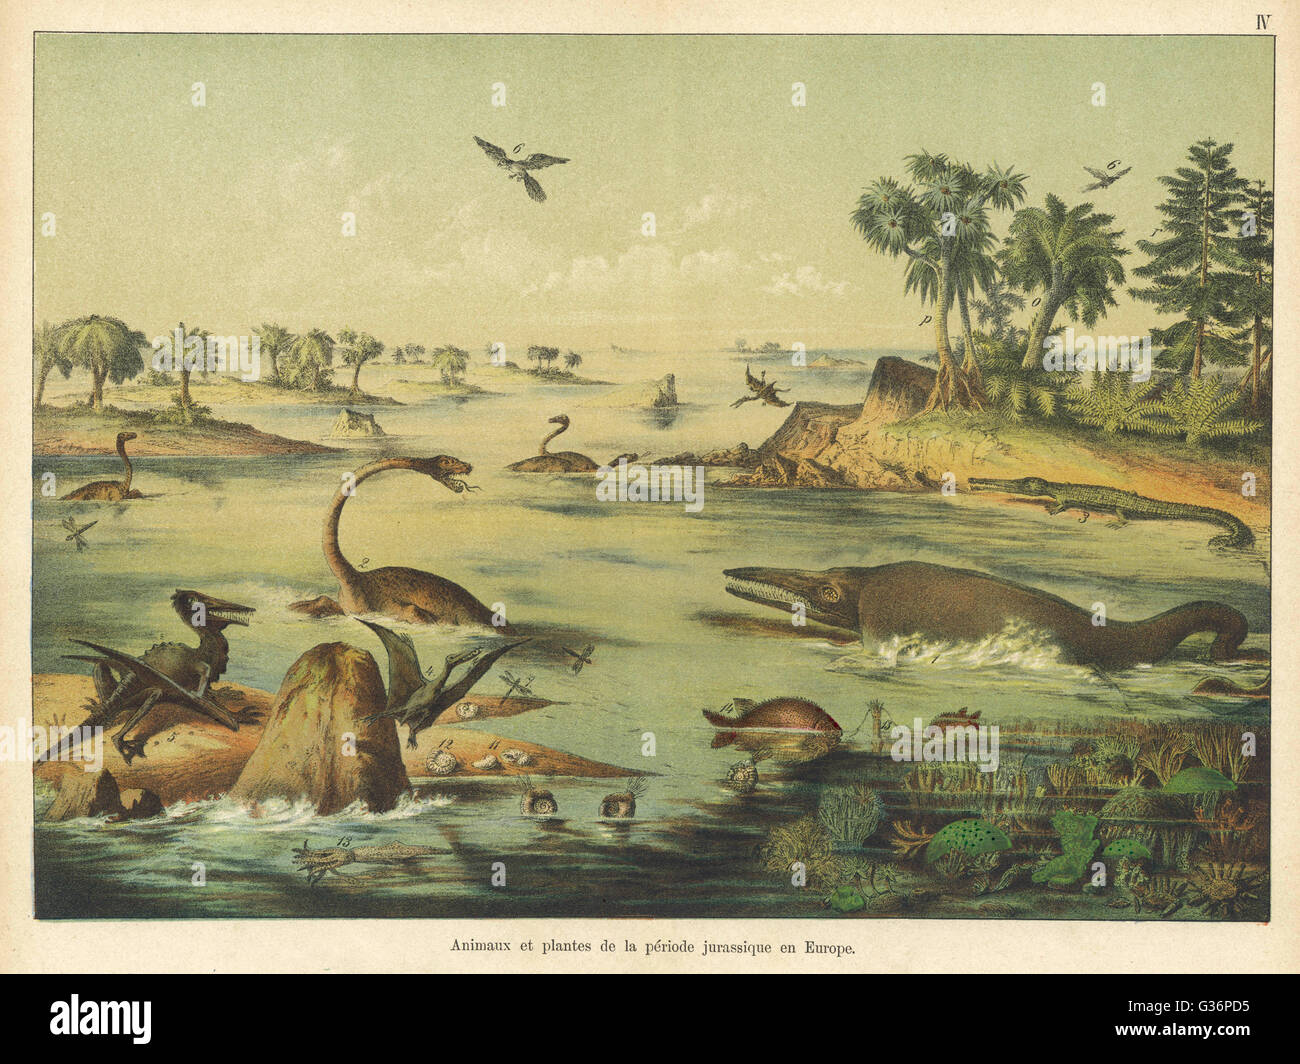 Animals and plants of the Jurassic era in Europe.          Date: BCE Stock Photo